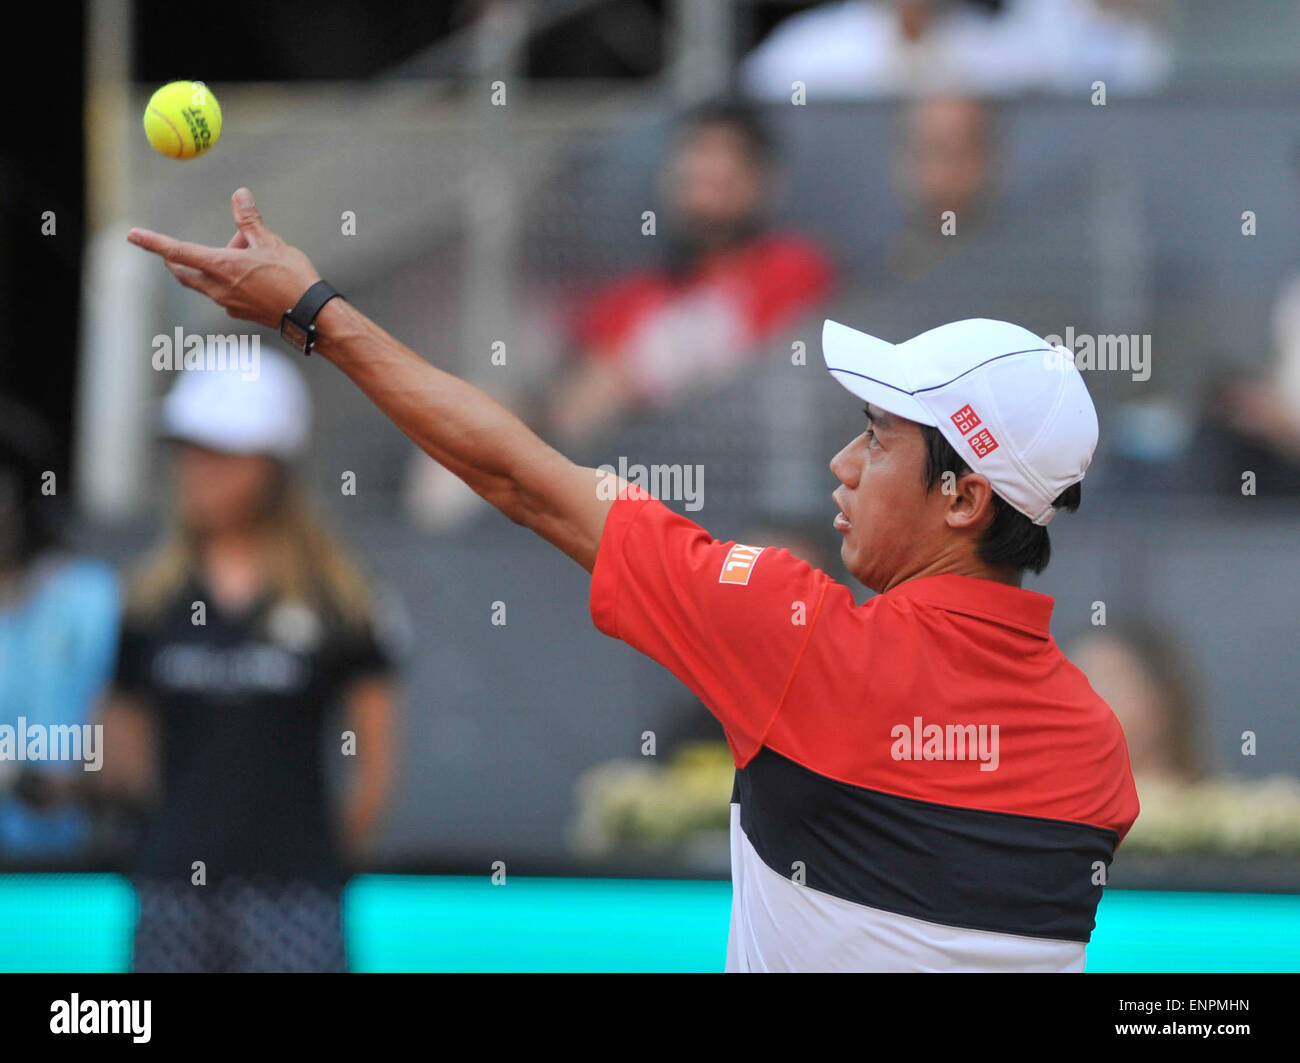 Madrid, Spain. 9th May, 2015. Kei Nishikori of Japan serves during a men's singles semifinal match against Andy Murray of Great Britain at the Madrid Open tennis tournament in Madrid, Spain, May 9, 2015. Kei Nishikori lost 0-2. Credit:  Xie Haining/Xinhua/Alamy Live News Stock Photo